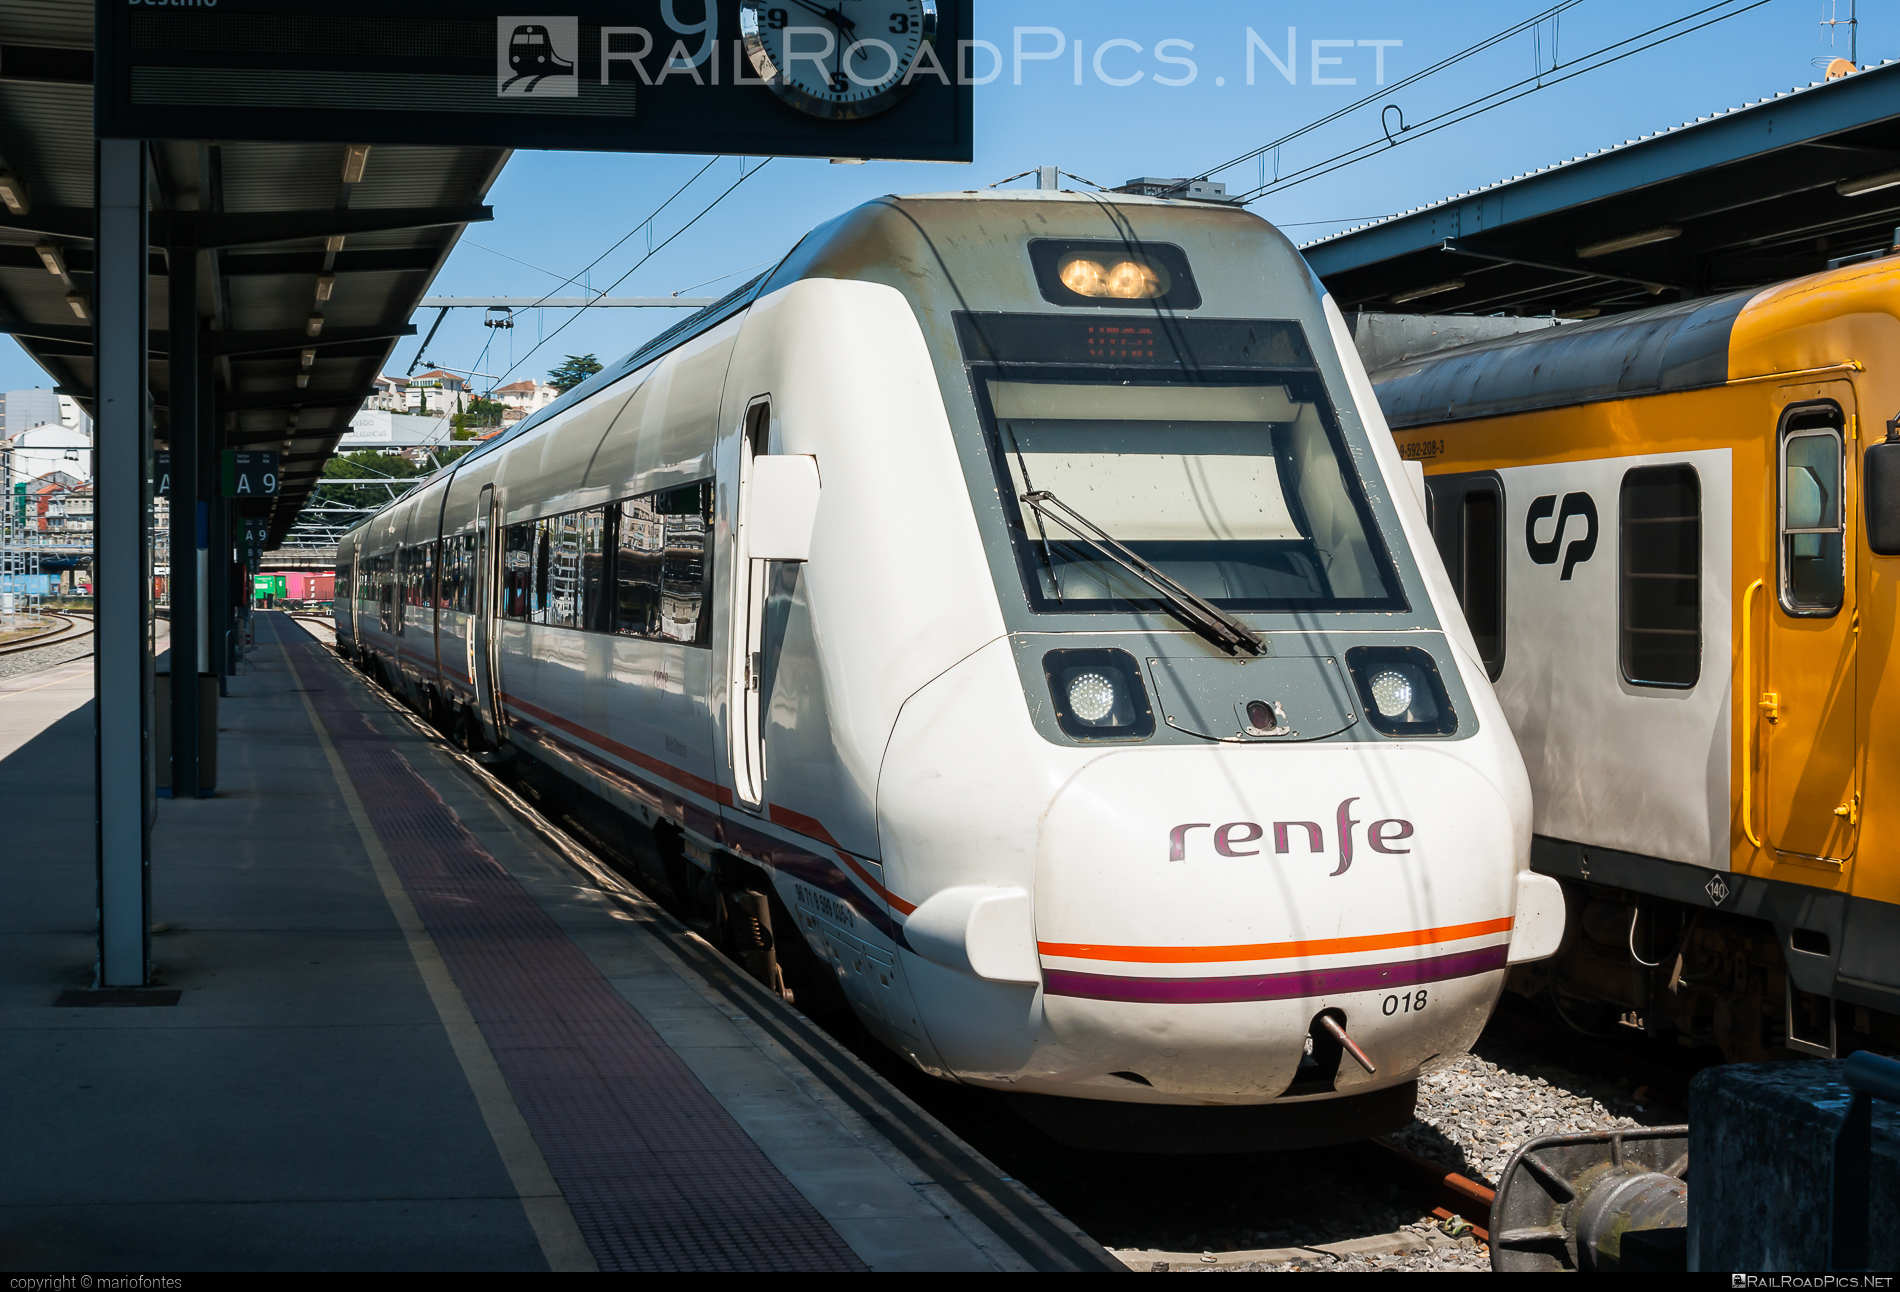 Renfe Class 599 - 035 operated by Renfe Viajeros, S.A. #caf #renfe #renfe599 #renfeClass599 #renfeViajeros #renfeViajerosSA